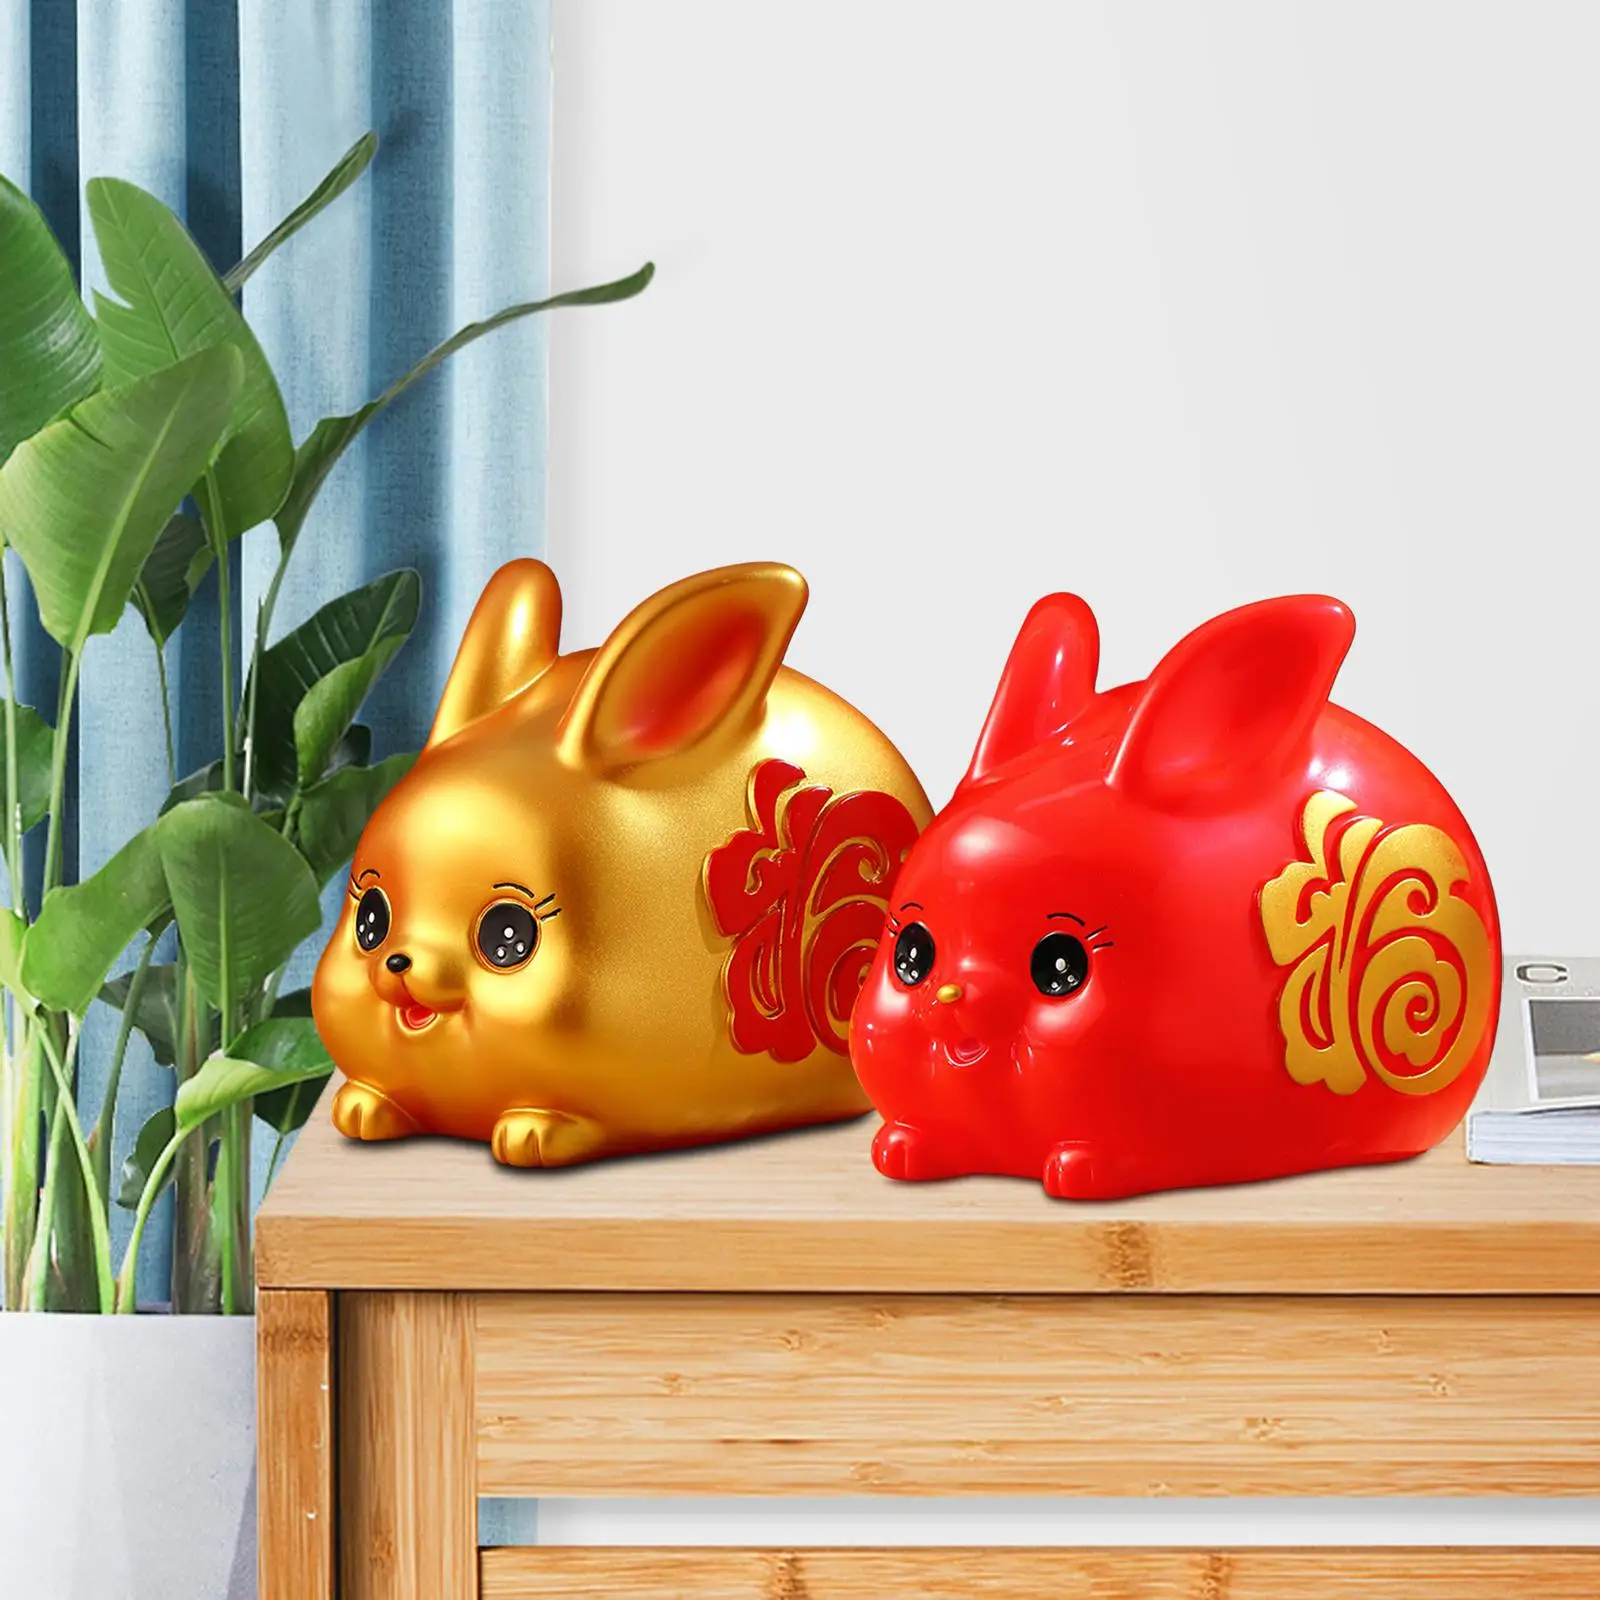 Lucky Rabbit Money Bank Bunny Figurines Change Container Decorative Sculpture Toys Ornaments Display Money Box for Household